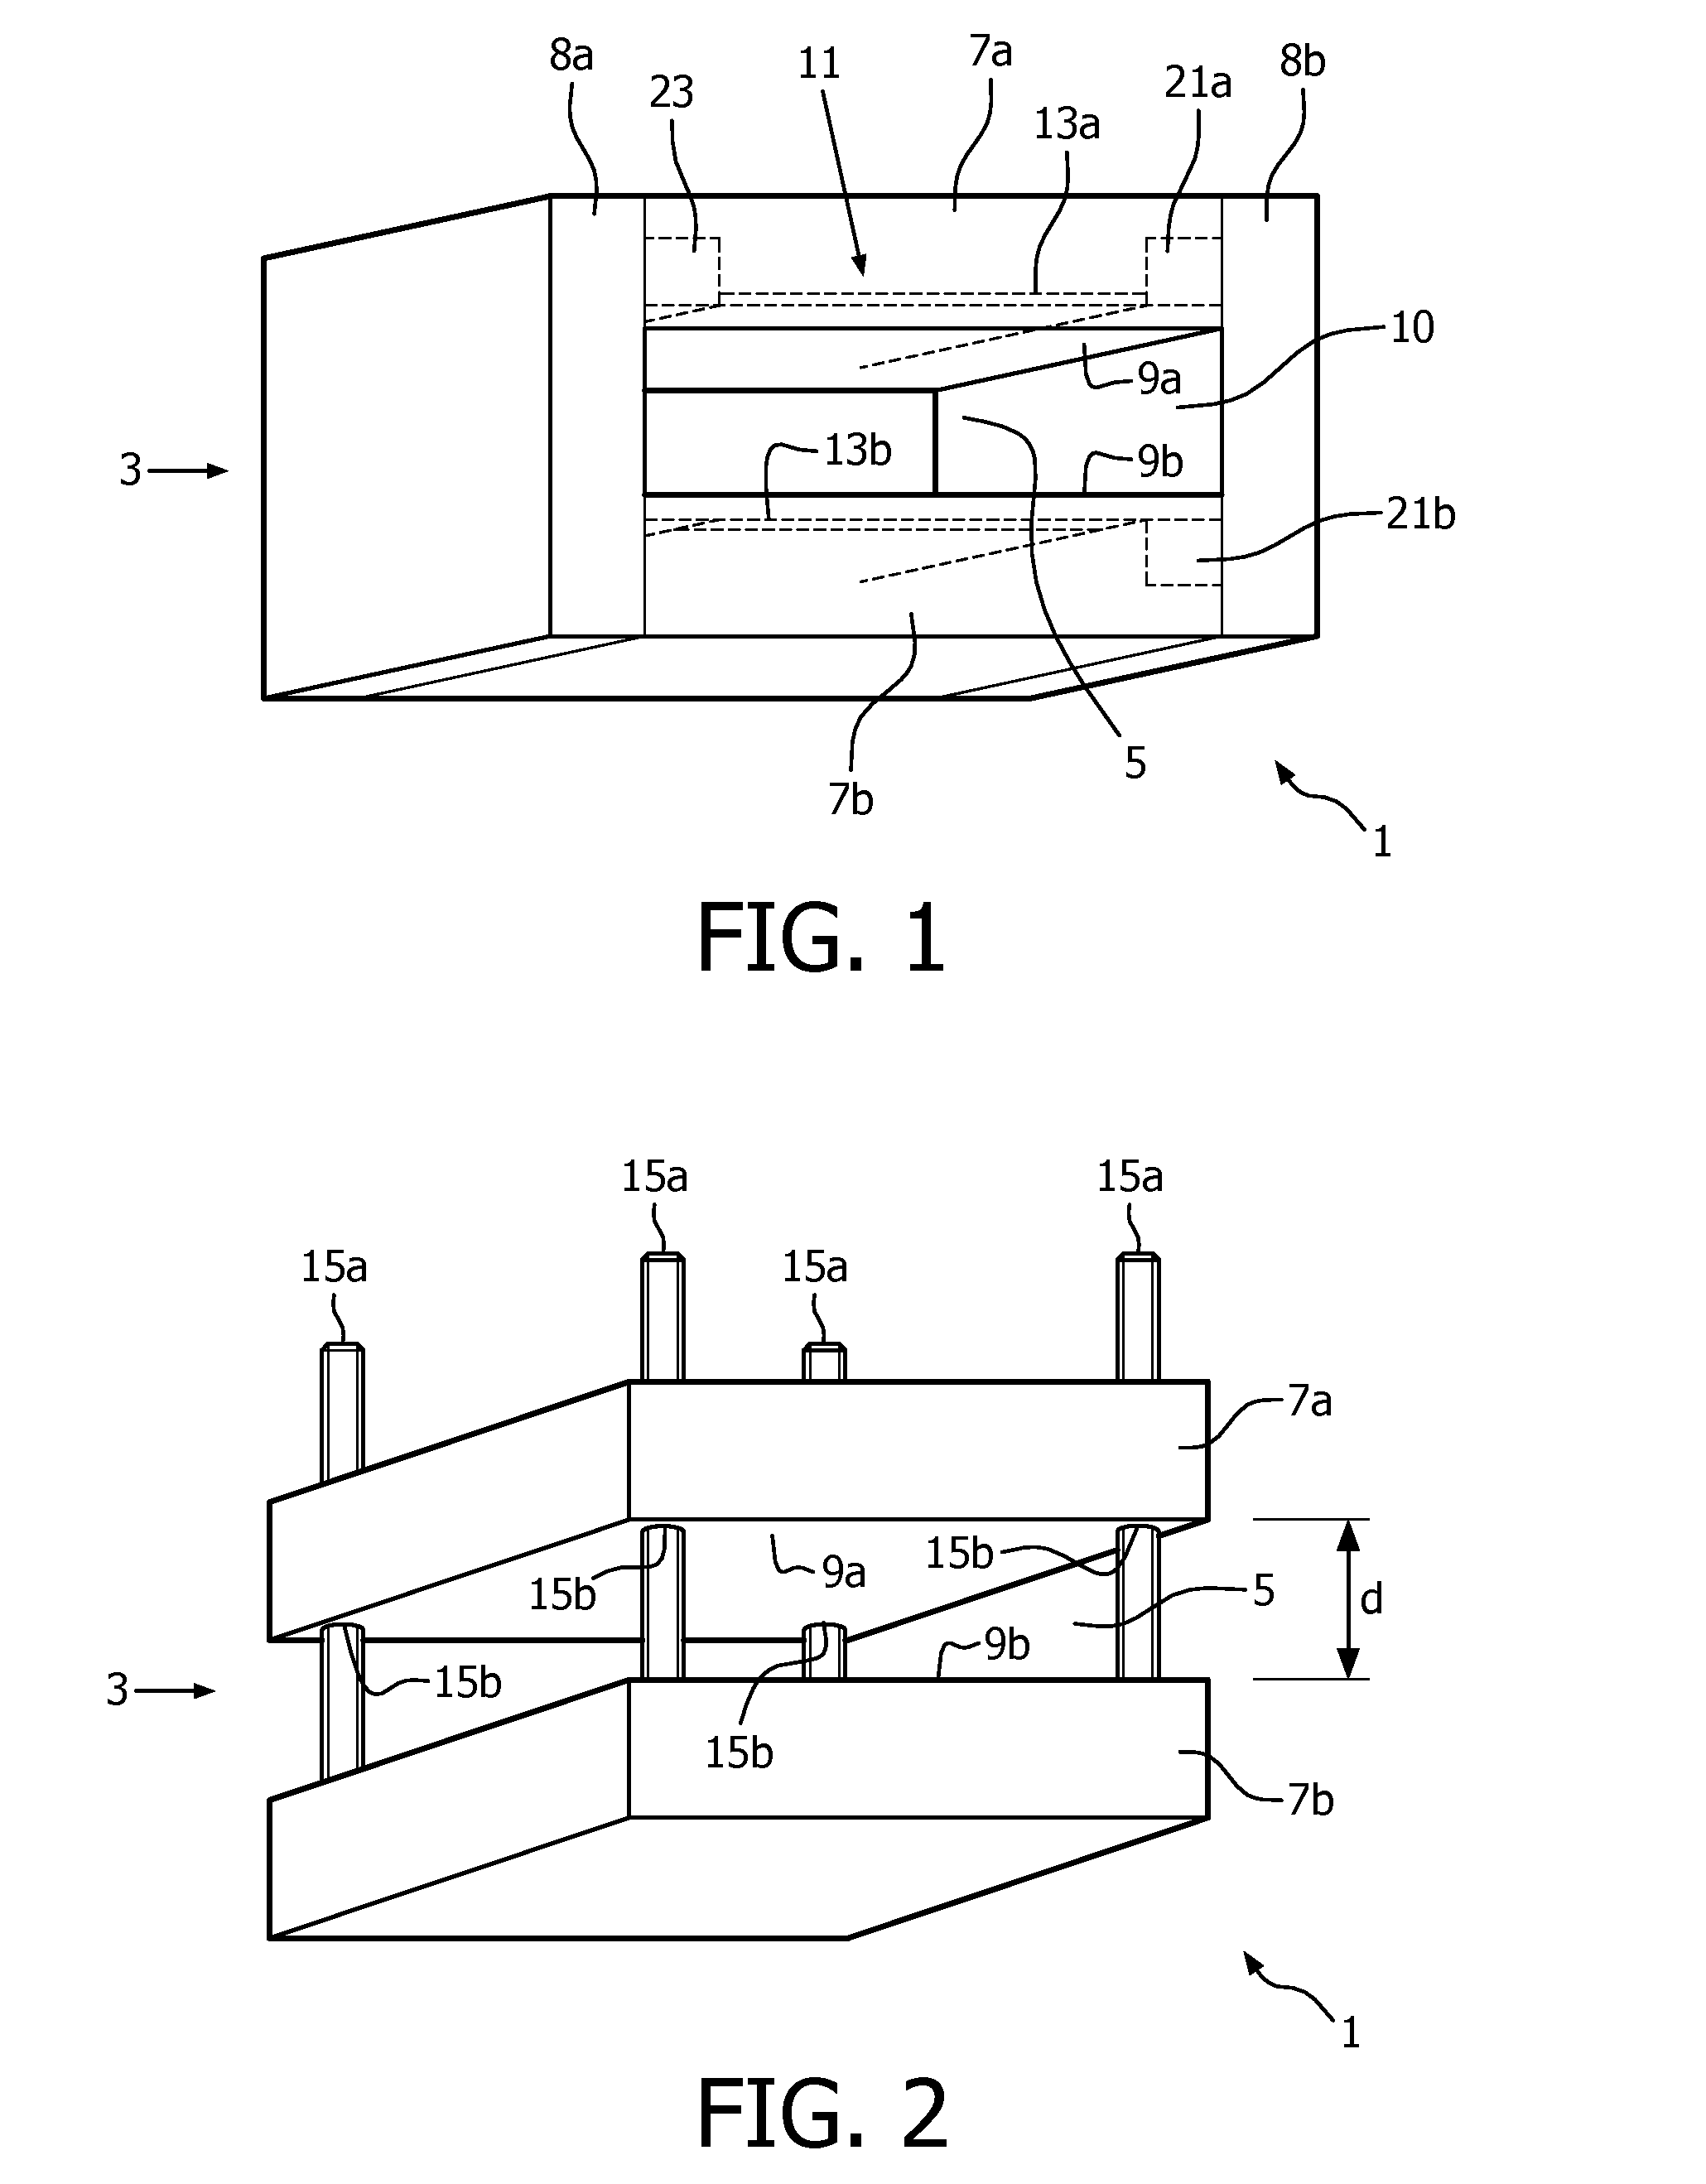 Power transmitter device for inductively providing power to a mobile device